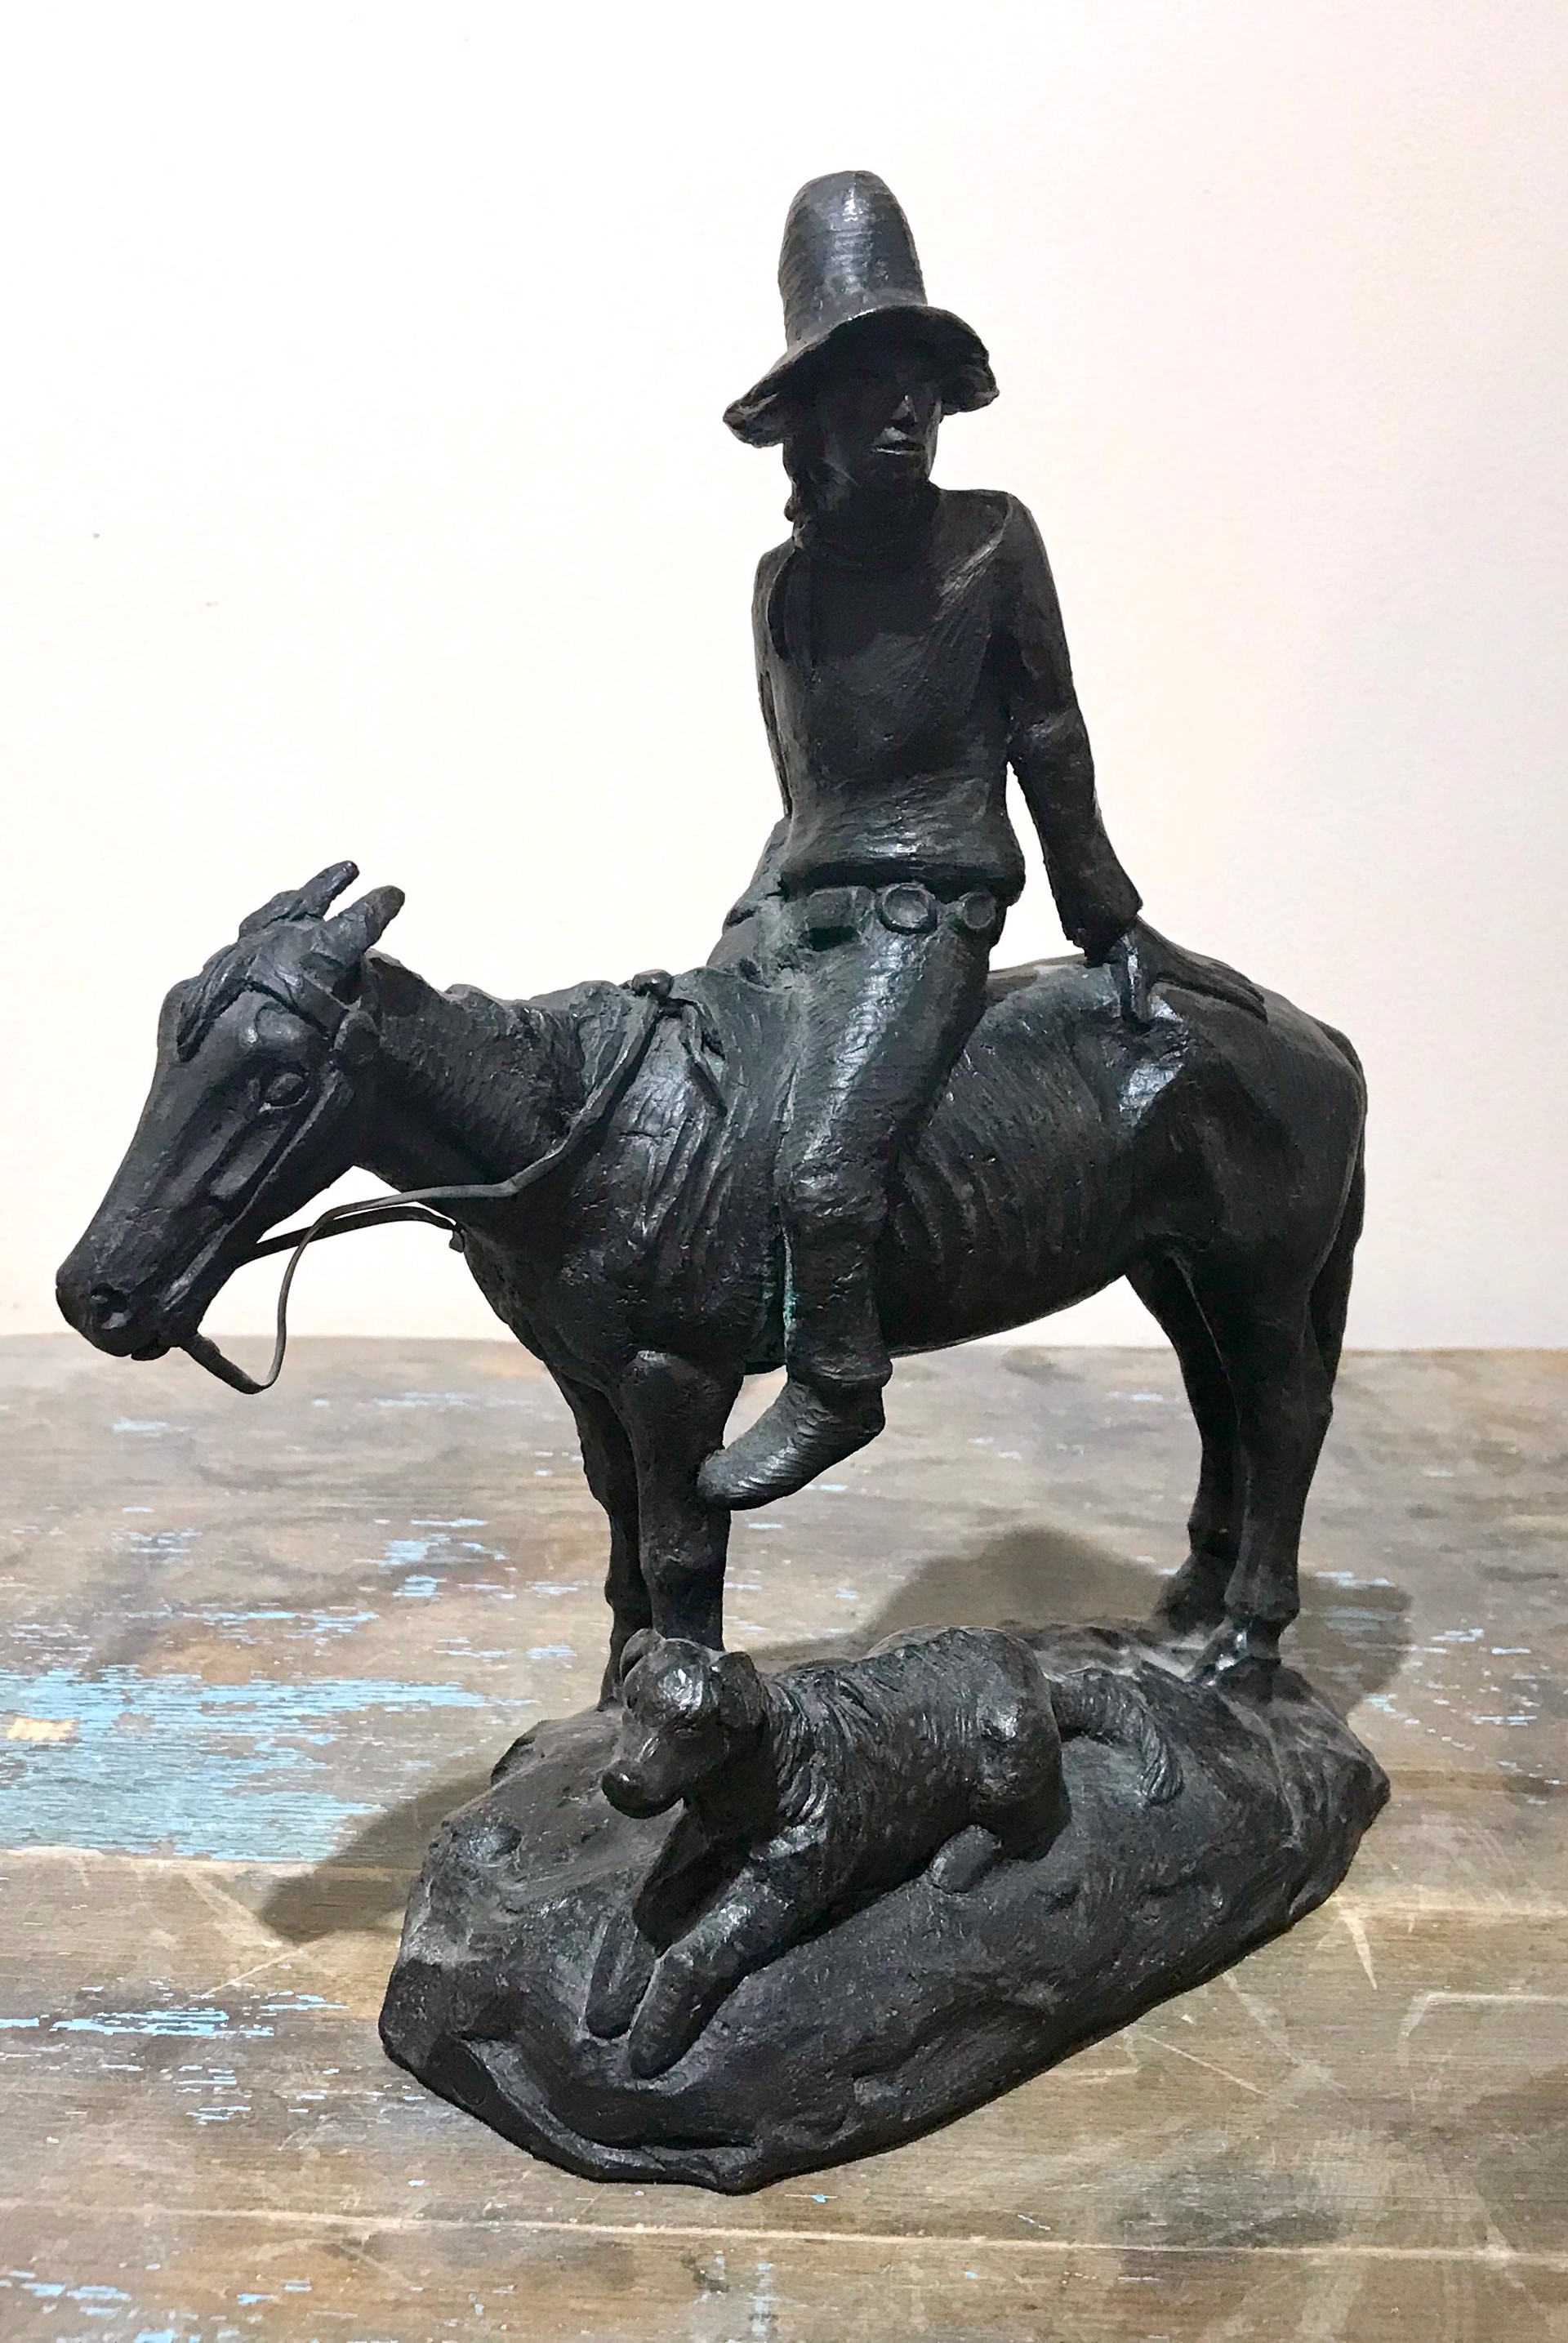 Man on Horse with Dog by Allan Houser